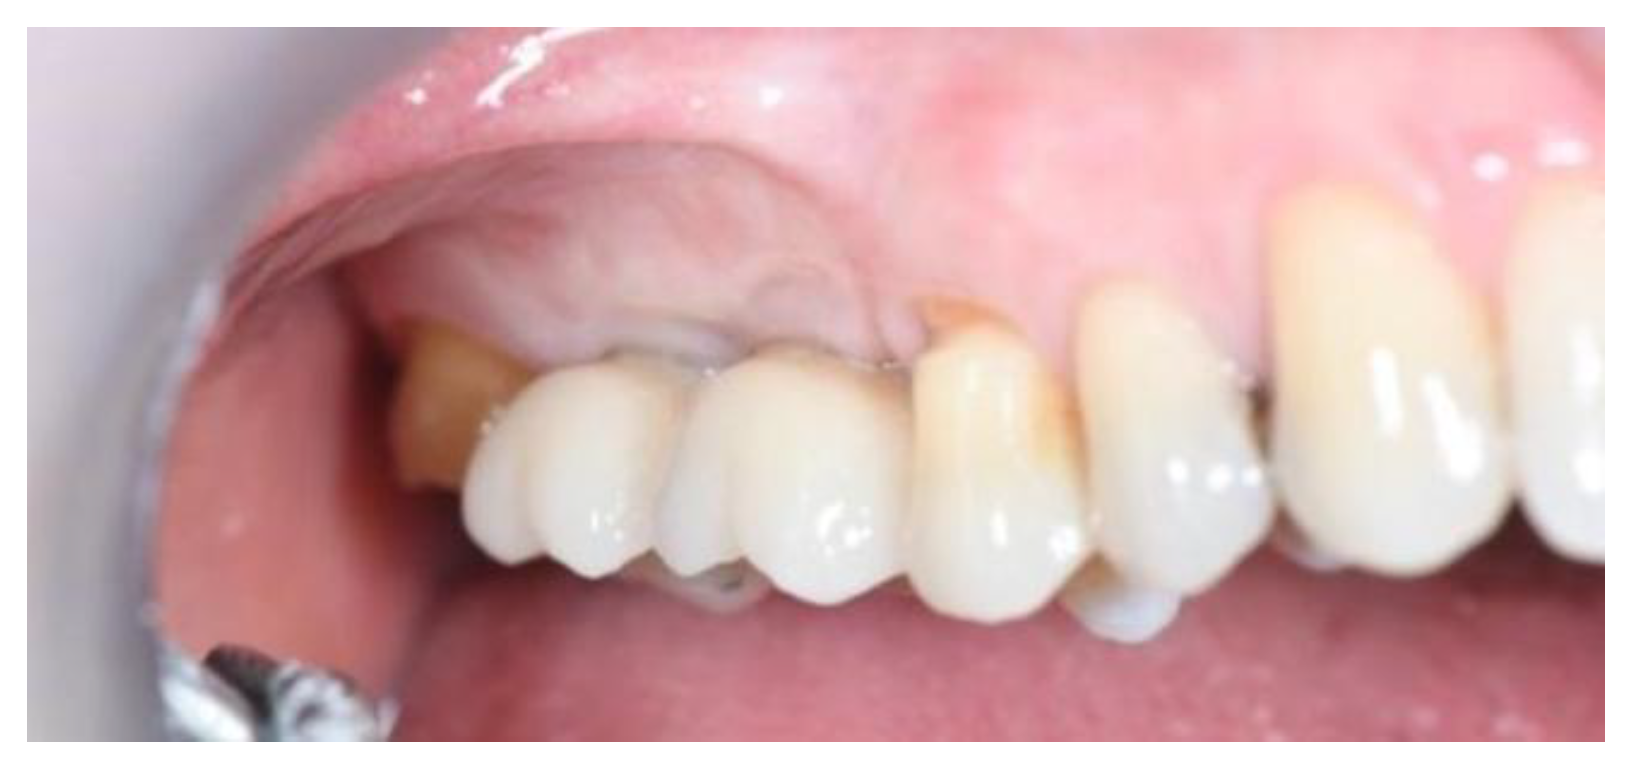 JCM | Free Full-Text | Long-Term Outcomes of Implants Placed in Maxillary  Sinus Floor Augmentation with Porous Fluorohydroxyapatite (Algipore&reg;  FRIOS&reg;) in Comparison with Anorganic Bovine Bone (Bio-Oss&reg;) and  Platelet Rich Plasma (PRP):